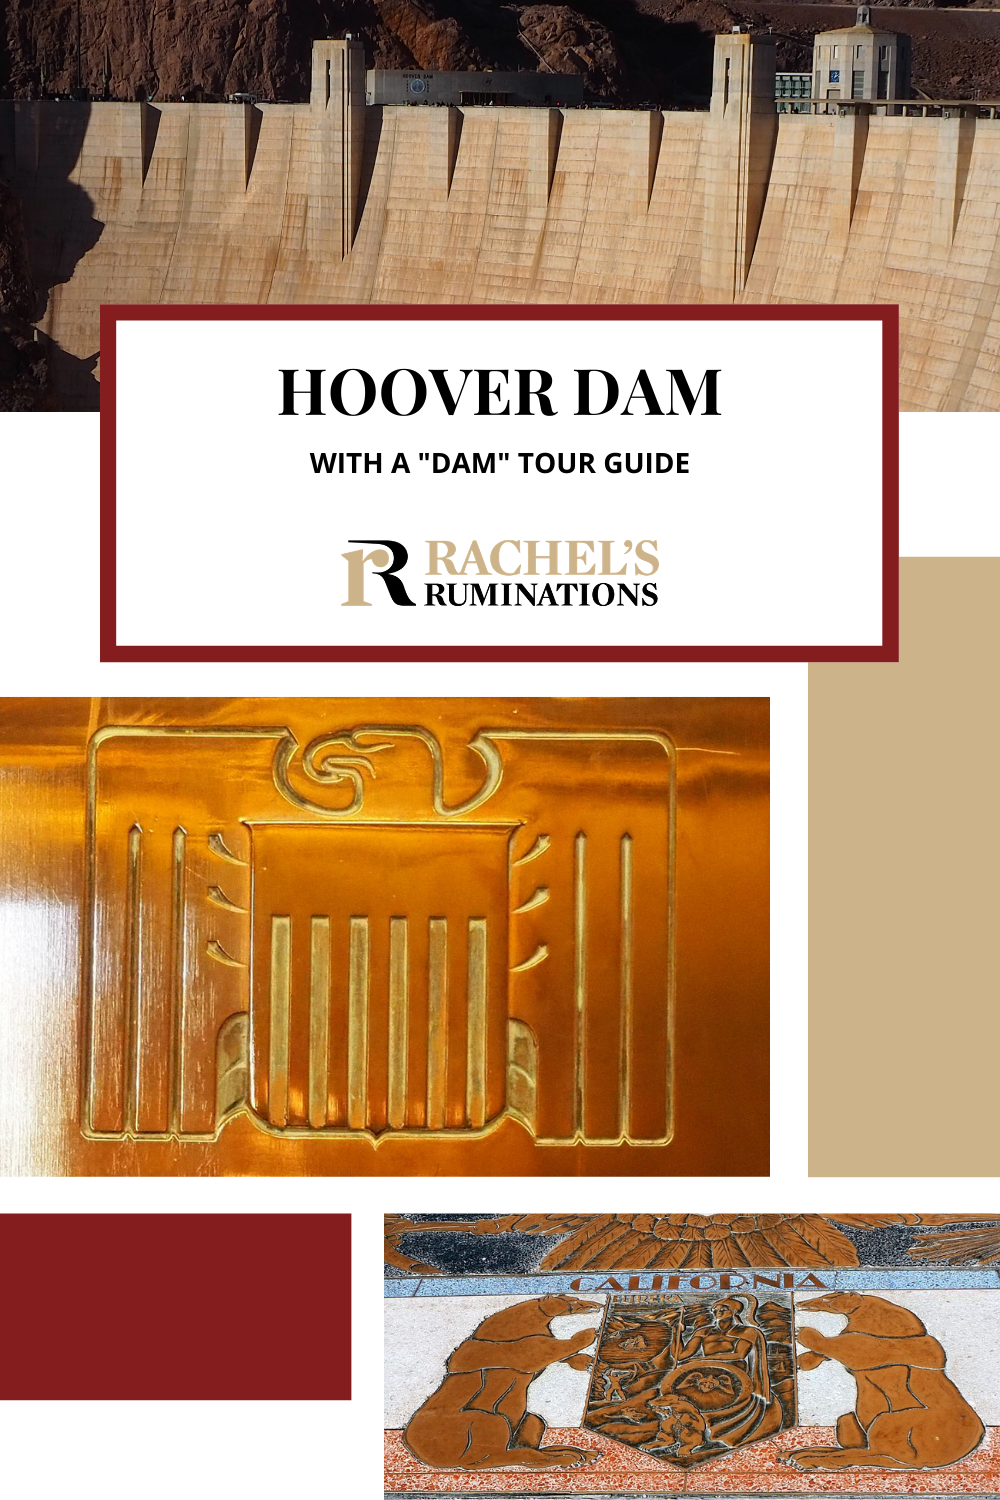 “My name is Arcelia and I’ll be your dam tour guide.” This was our introduction to visiting Hoover Dam, a masterpiece of Art Deco industrial design. Read about the Hoover Dam tour here! via @rachelsruminations